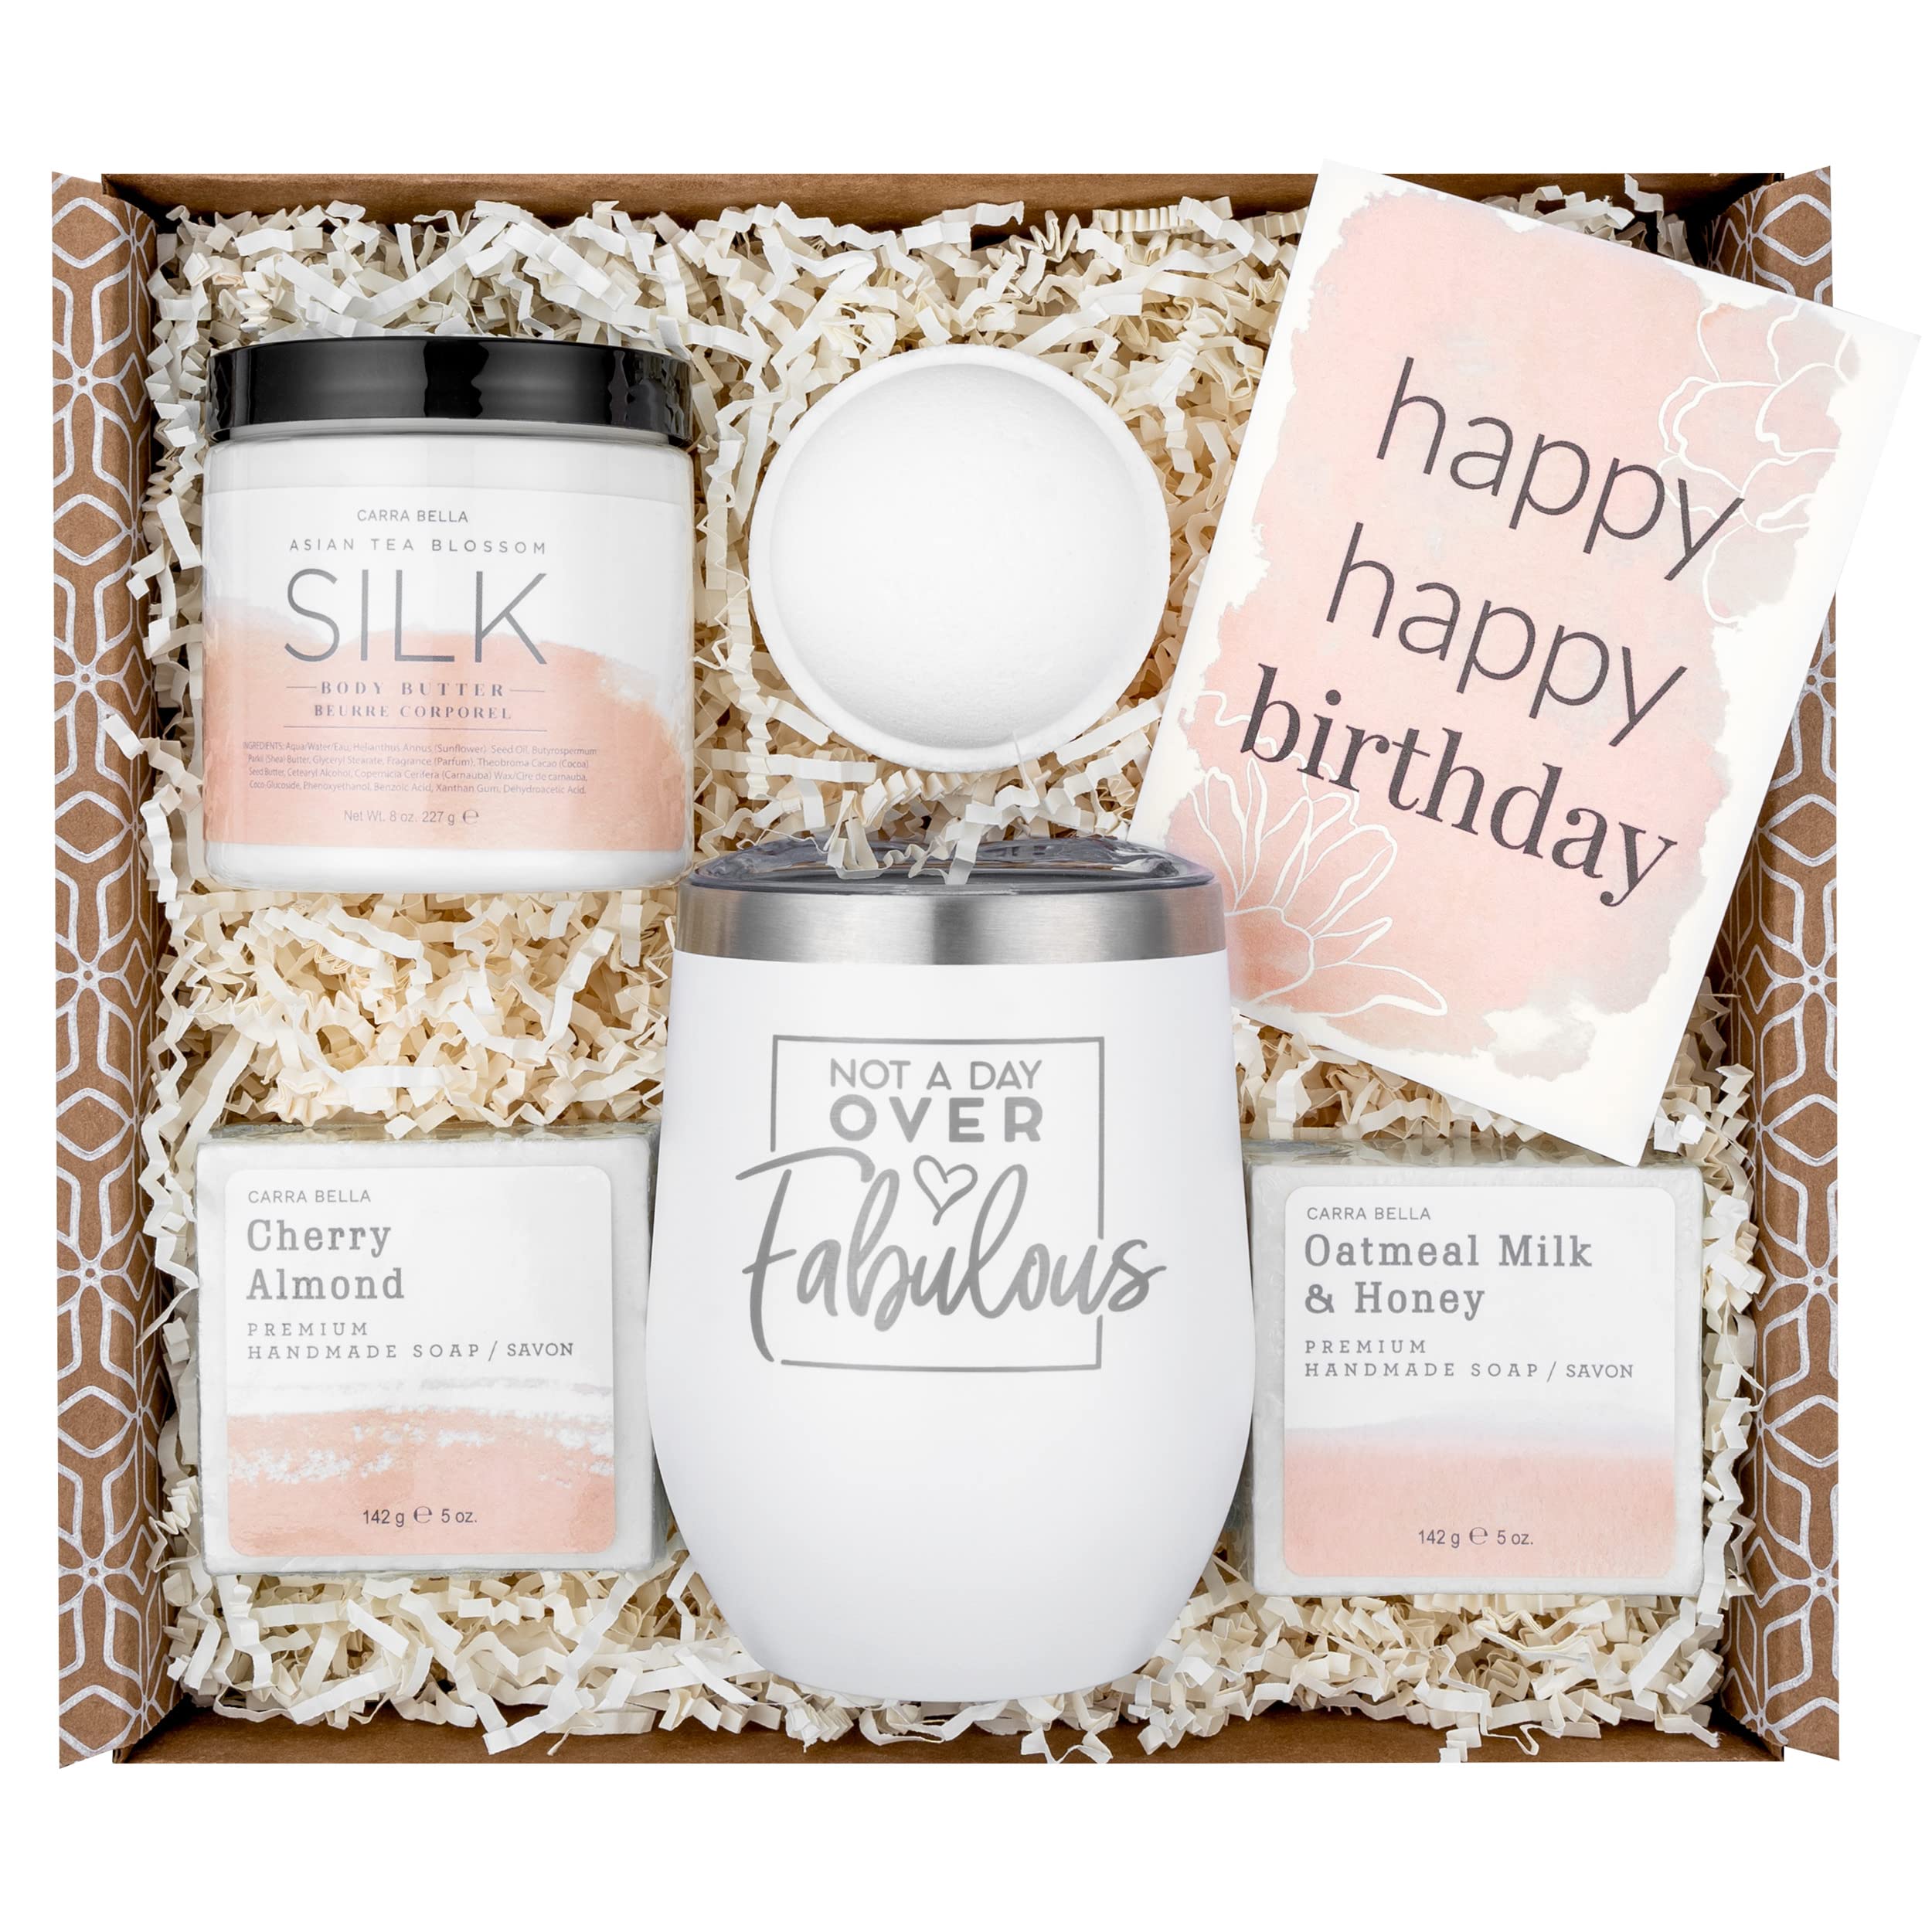 Friendship Gifts For Women - Christmas Best Friend Gifts, Happy Birthd